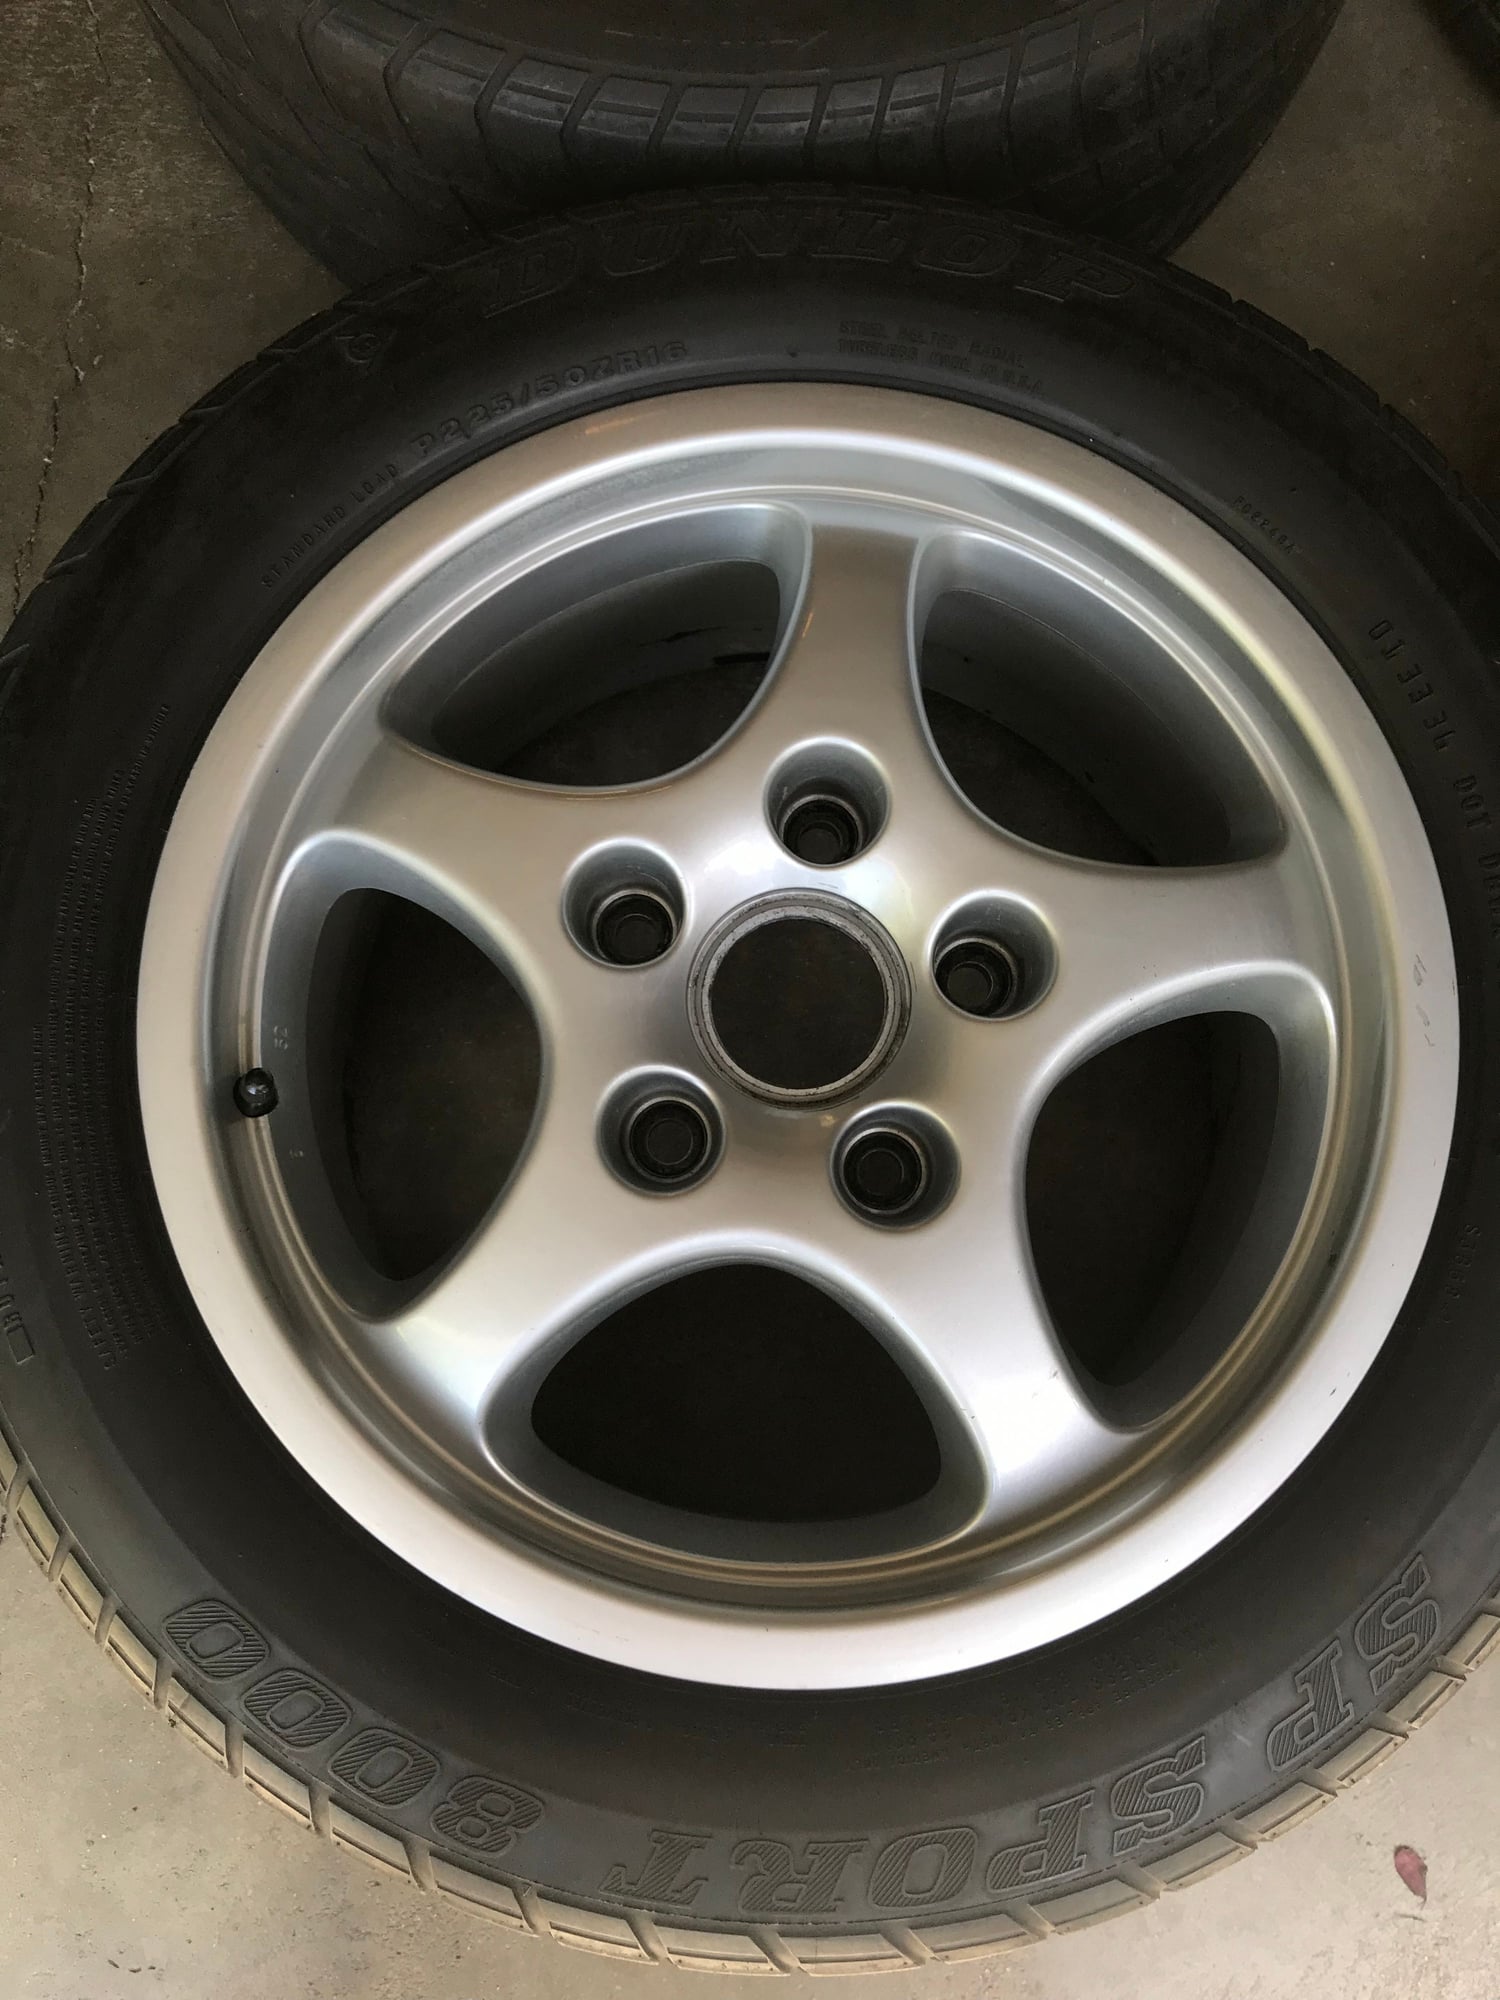 Wheels and Tires/Axles - 16 inch 964/968 cup wheels - Used - 1989 to 1994 Porsche All Models - Redlands, CA 92373, United States